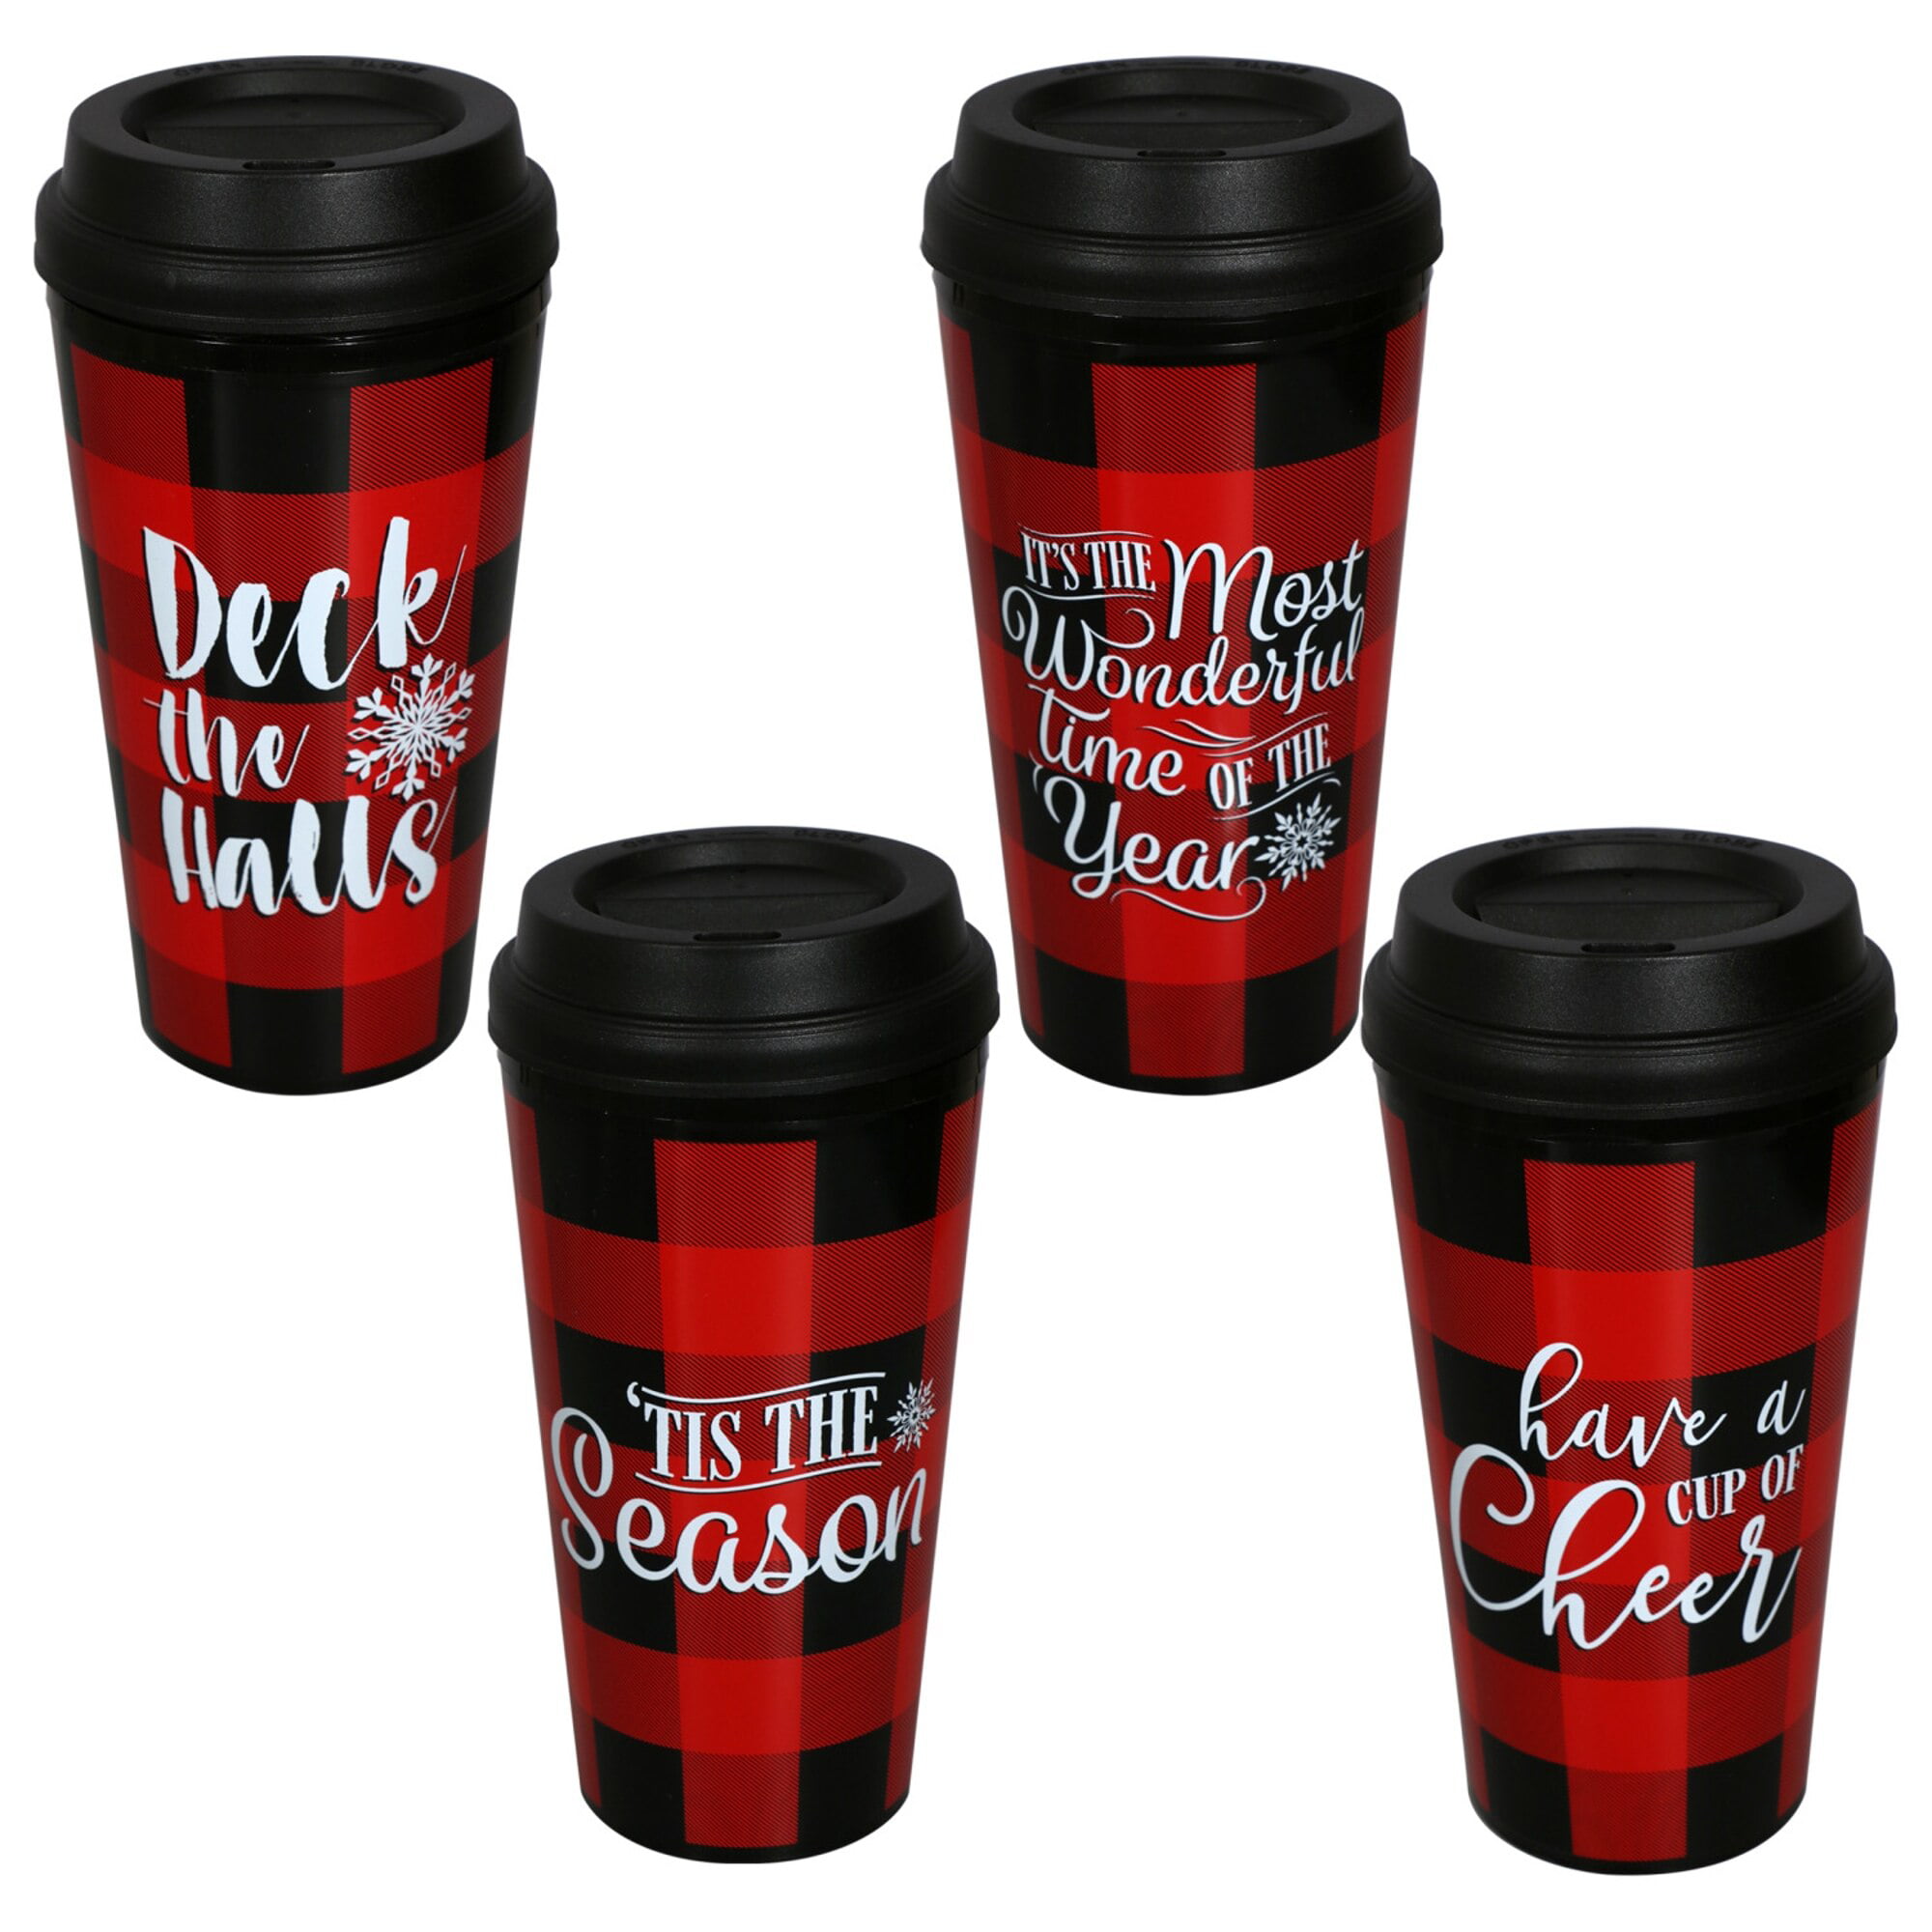 Reusable Coffee Cups with Lids, Reusable Coffee Cup